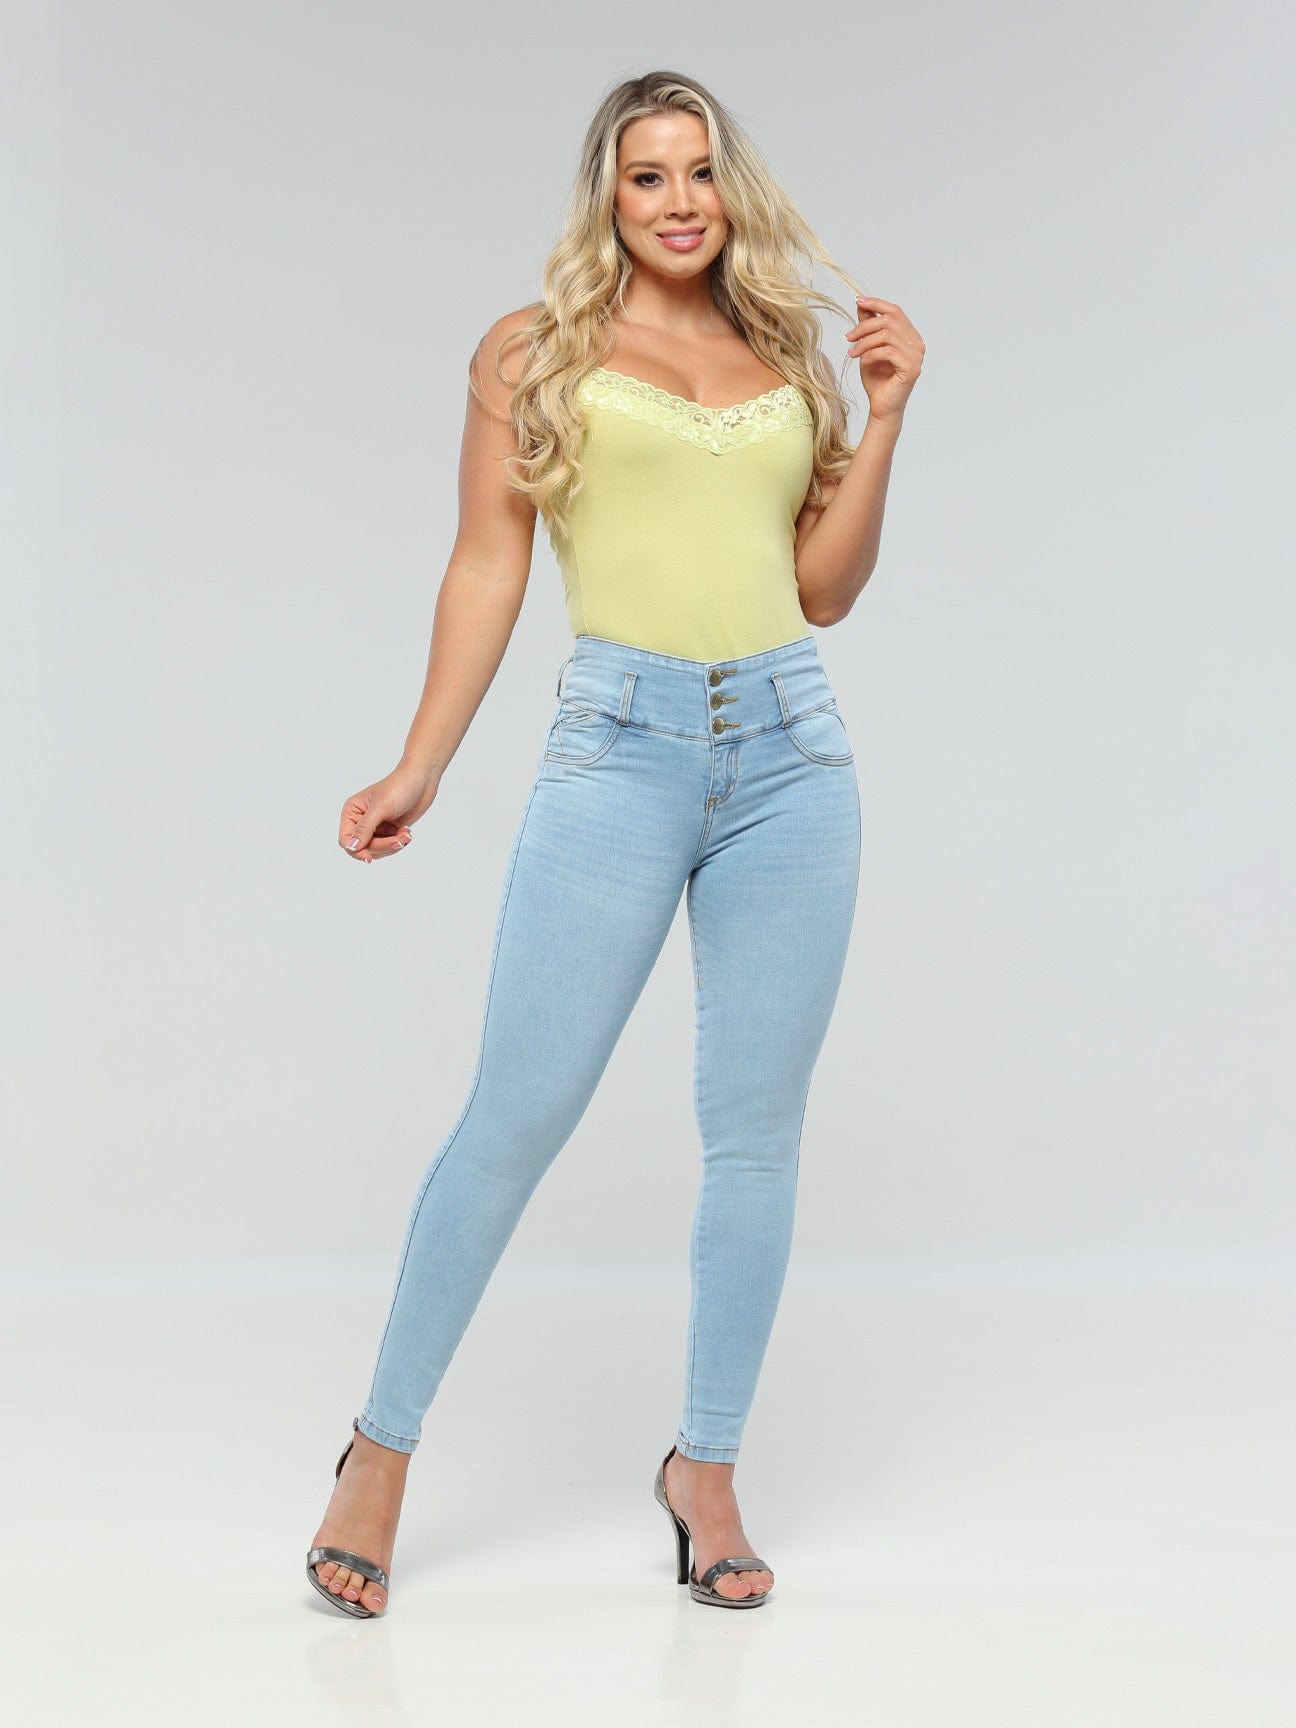 Jogger Cargo UP-1580 / Confidence-Boosting Butt-Lift Jeans / Shapely and  Lifted Look Jeans